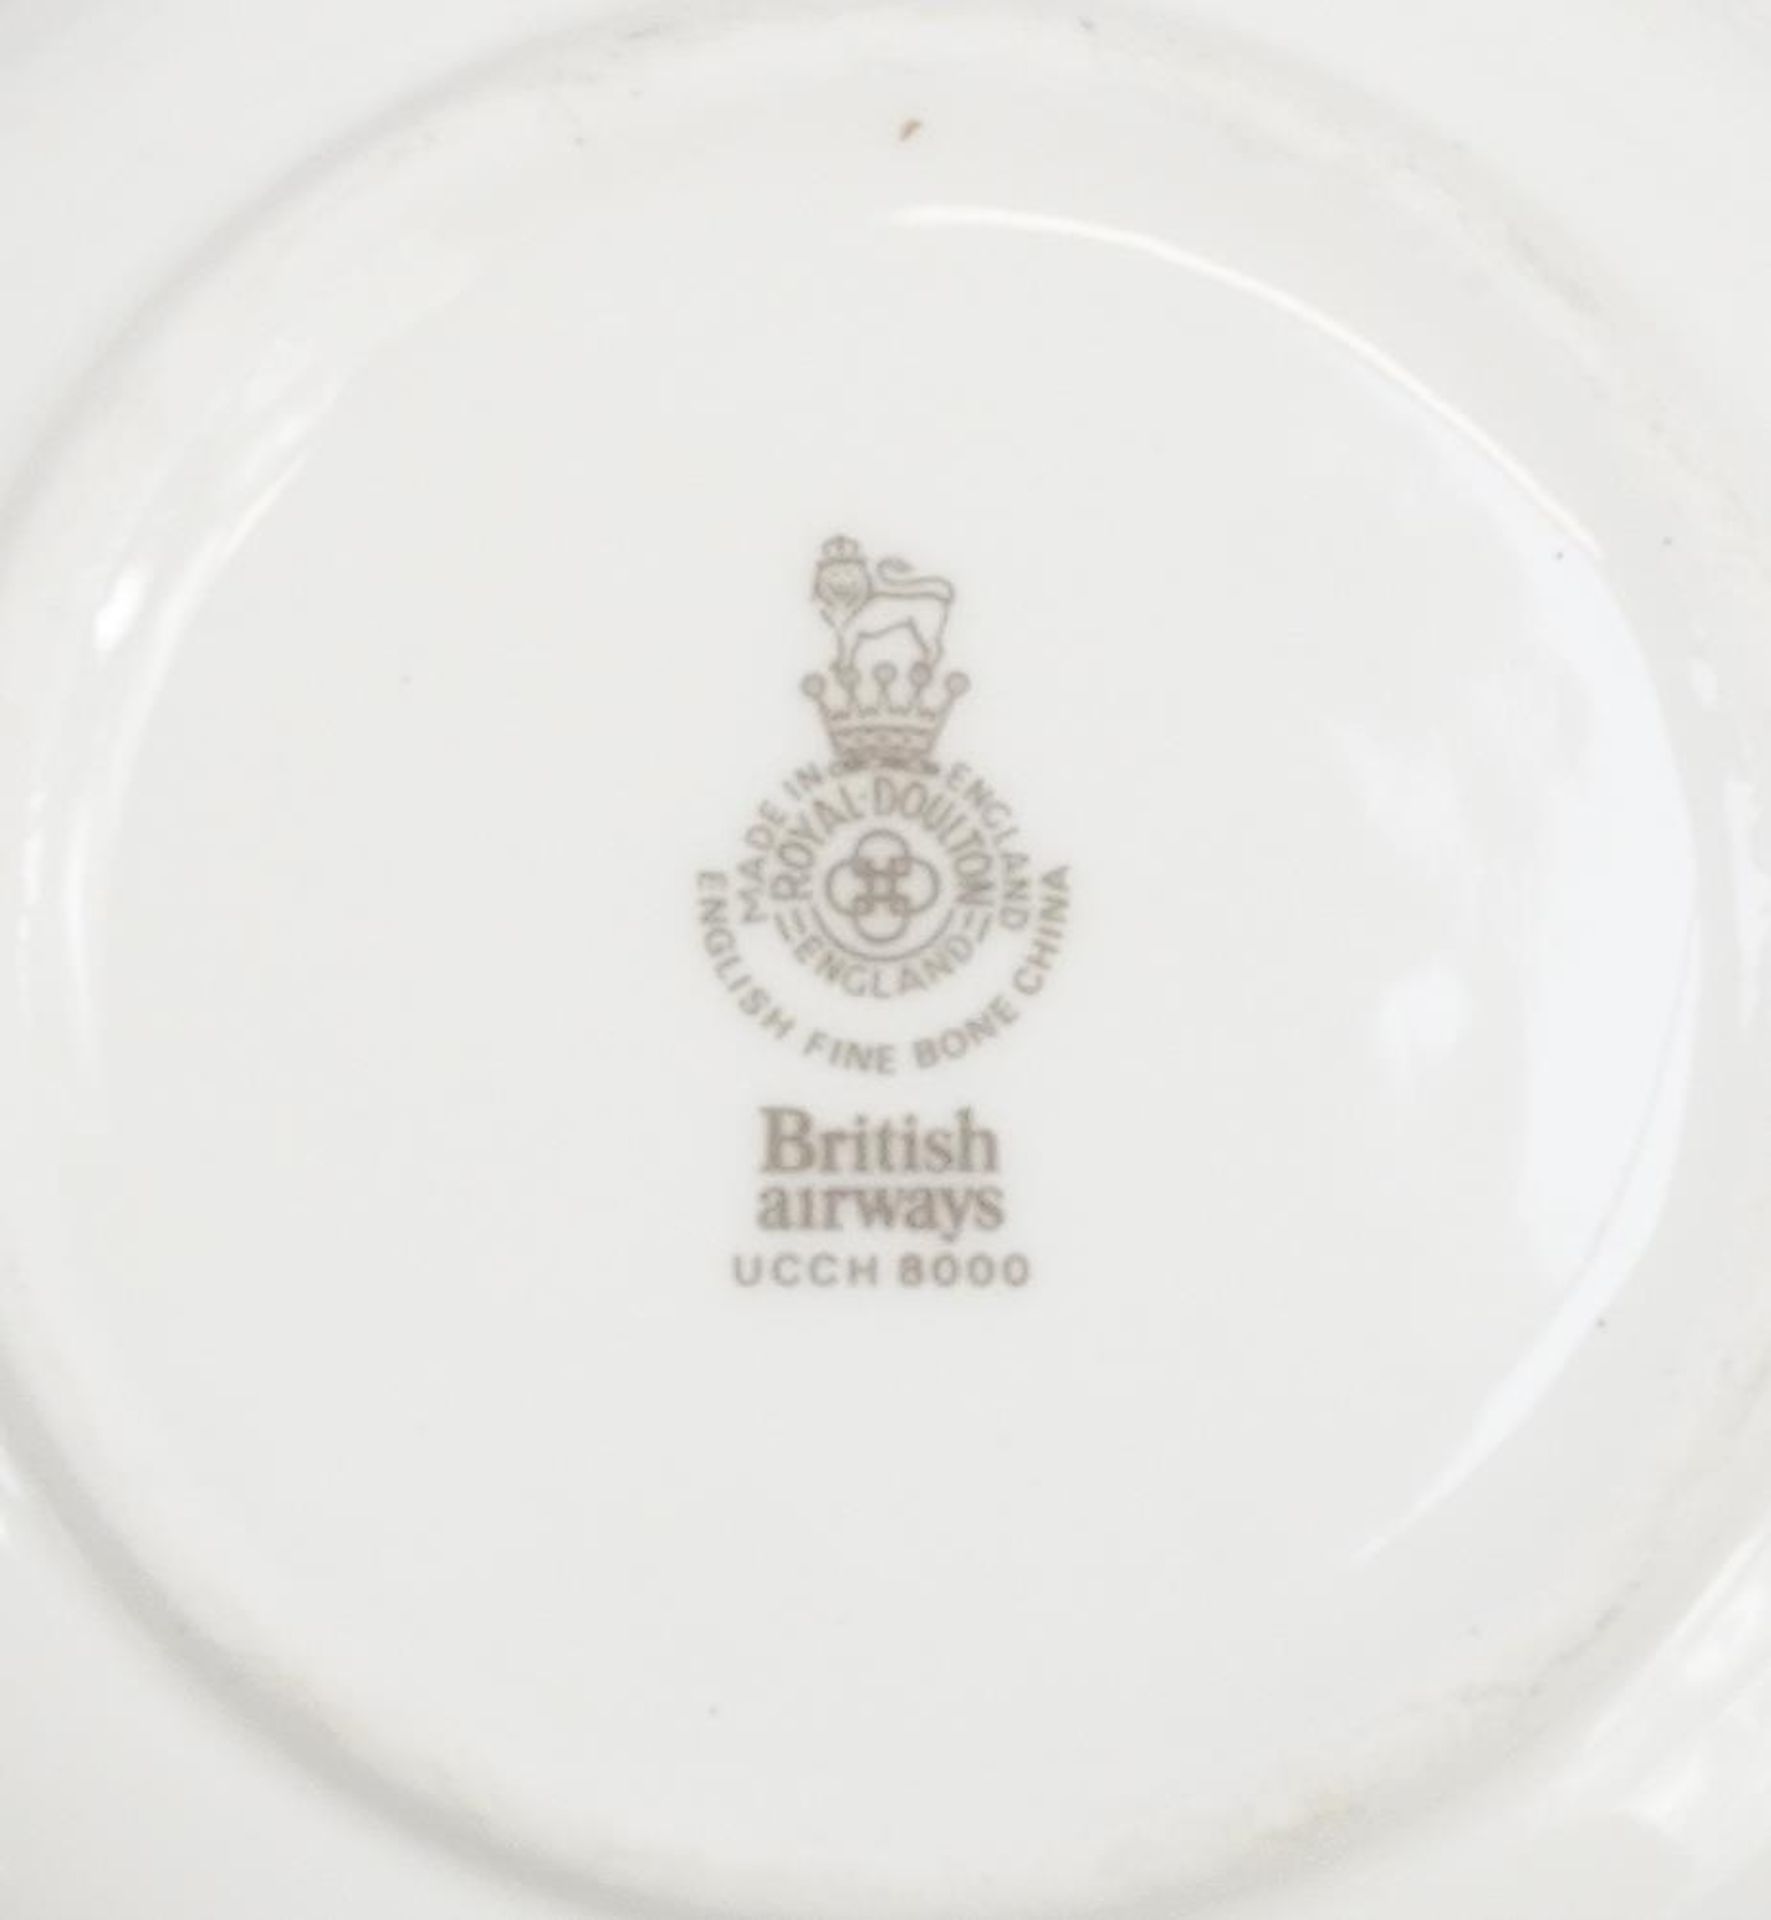 Malcolm Keen for Royal Doulton, aviation interest Royal Doulton British Airways teaware UCCH 8005 - Image 4 of 4